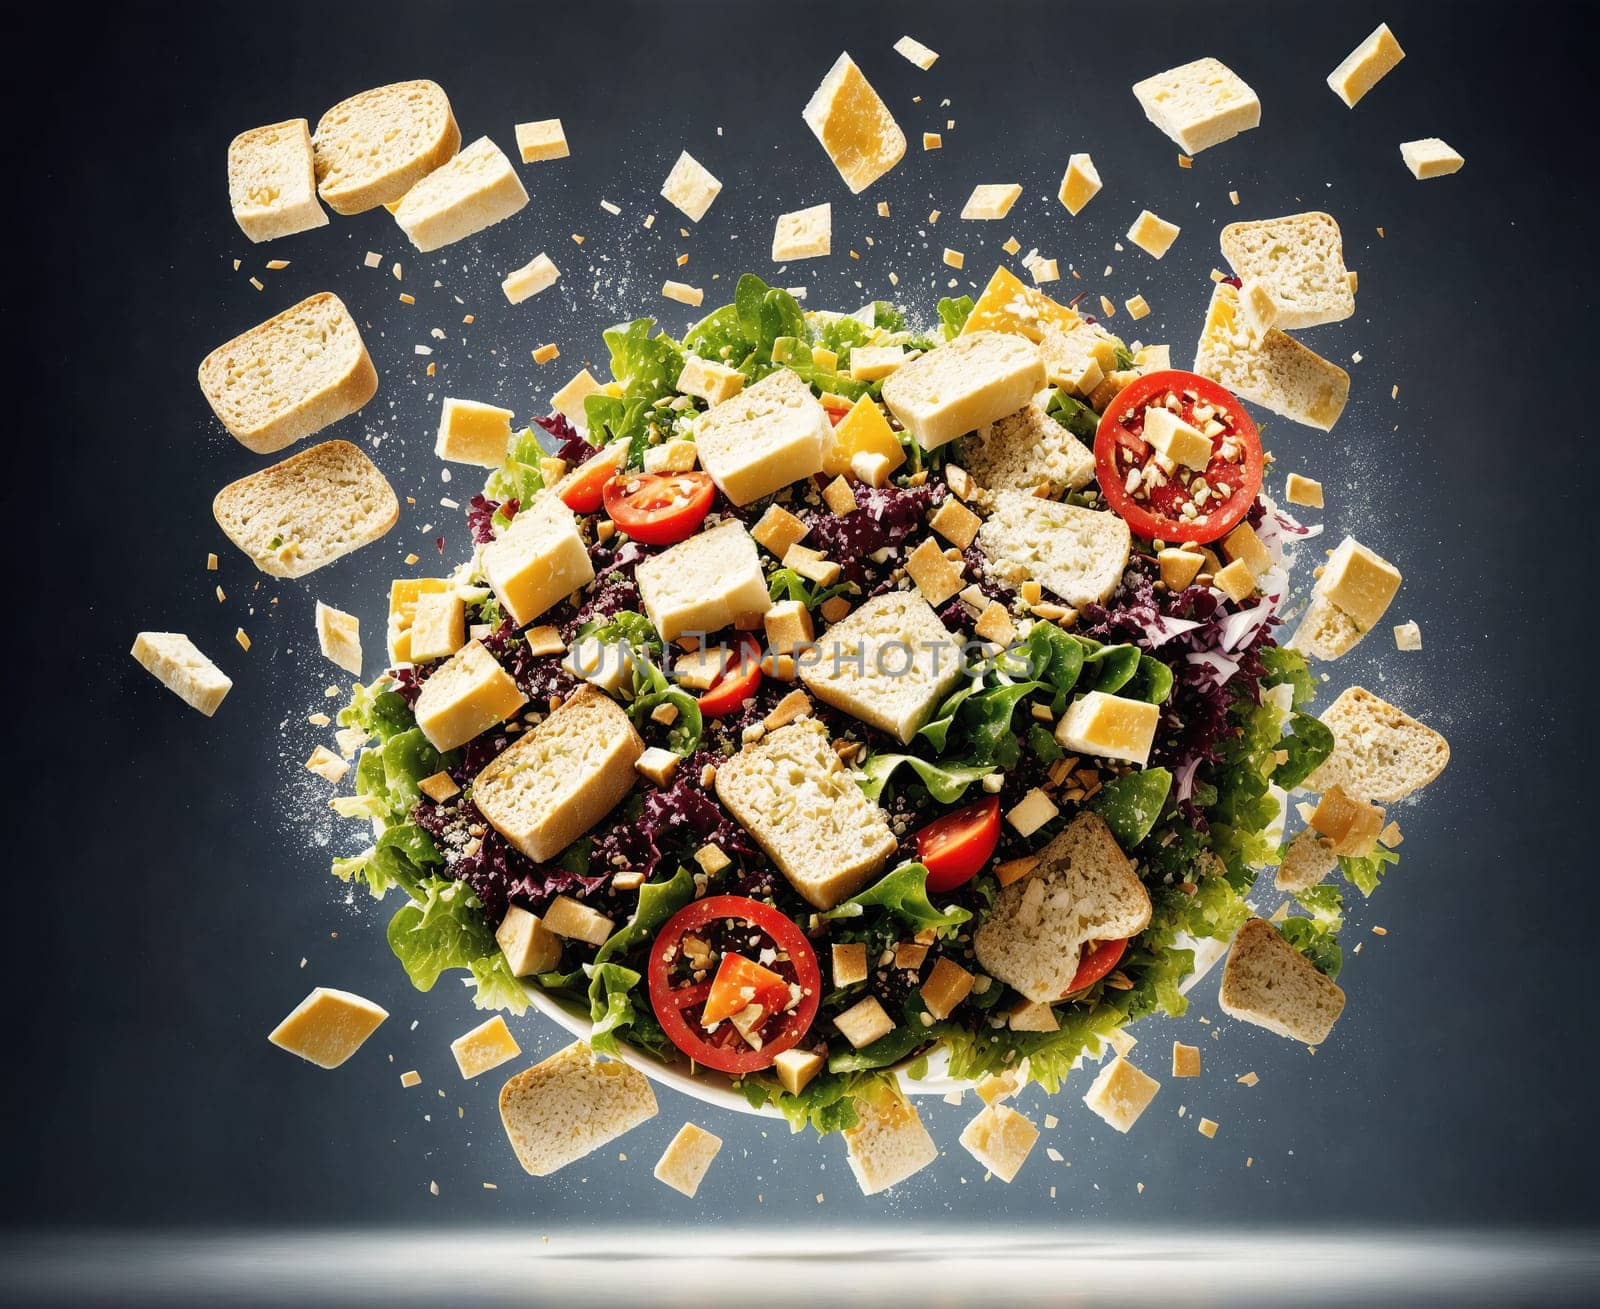 The image is a photograph of a salad made up of various ingredients such as lettuce, tomatoes, cheese, and bread, with some of the ingredients flying through the air.